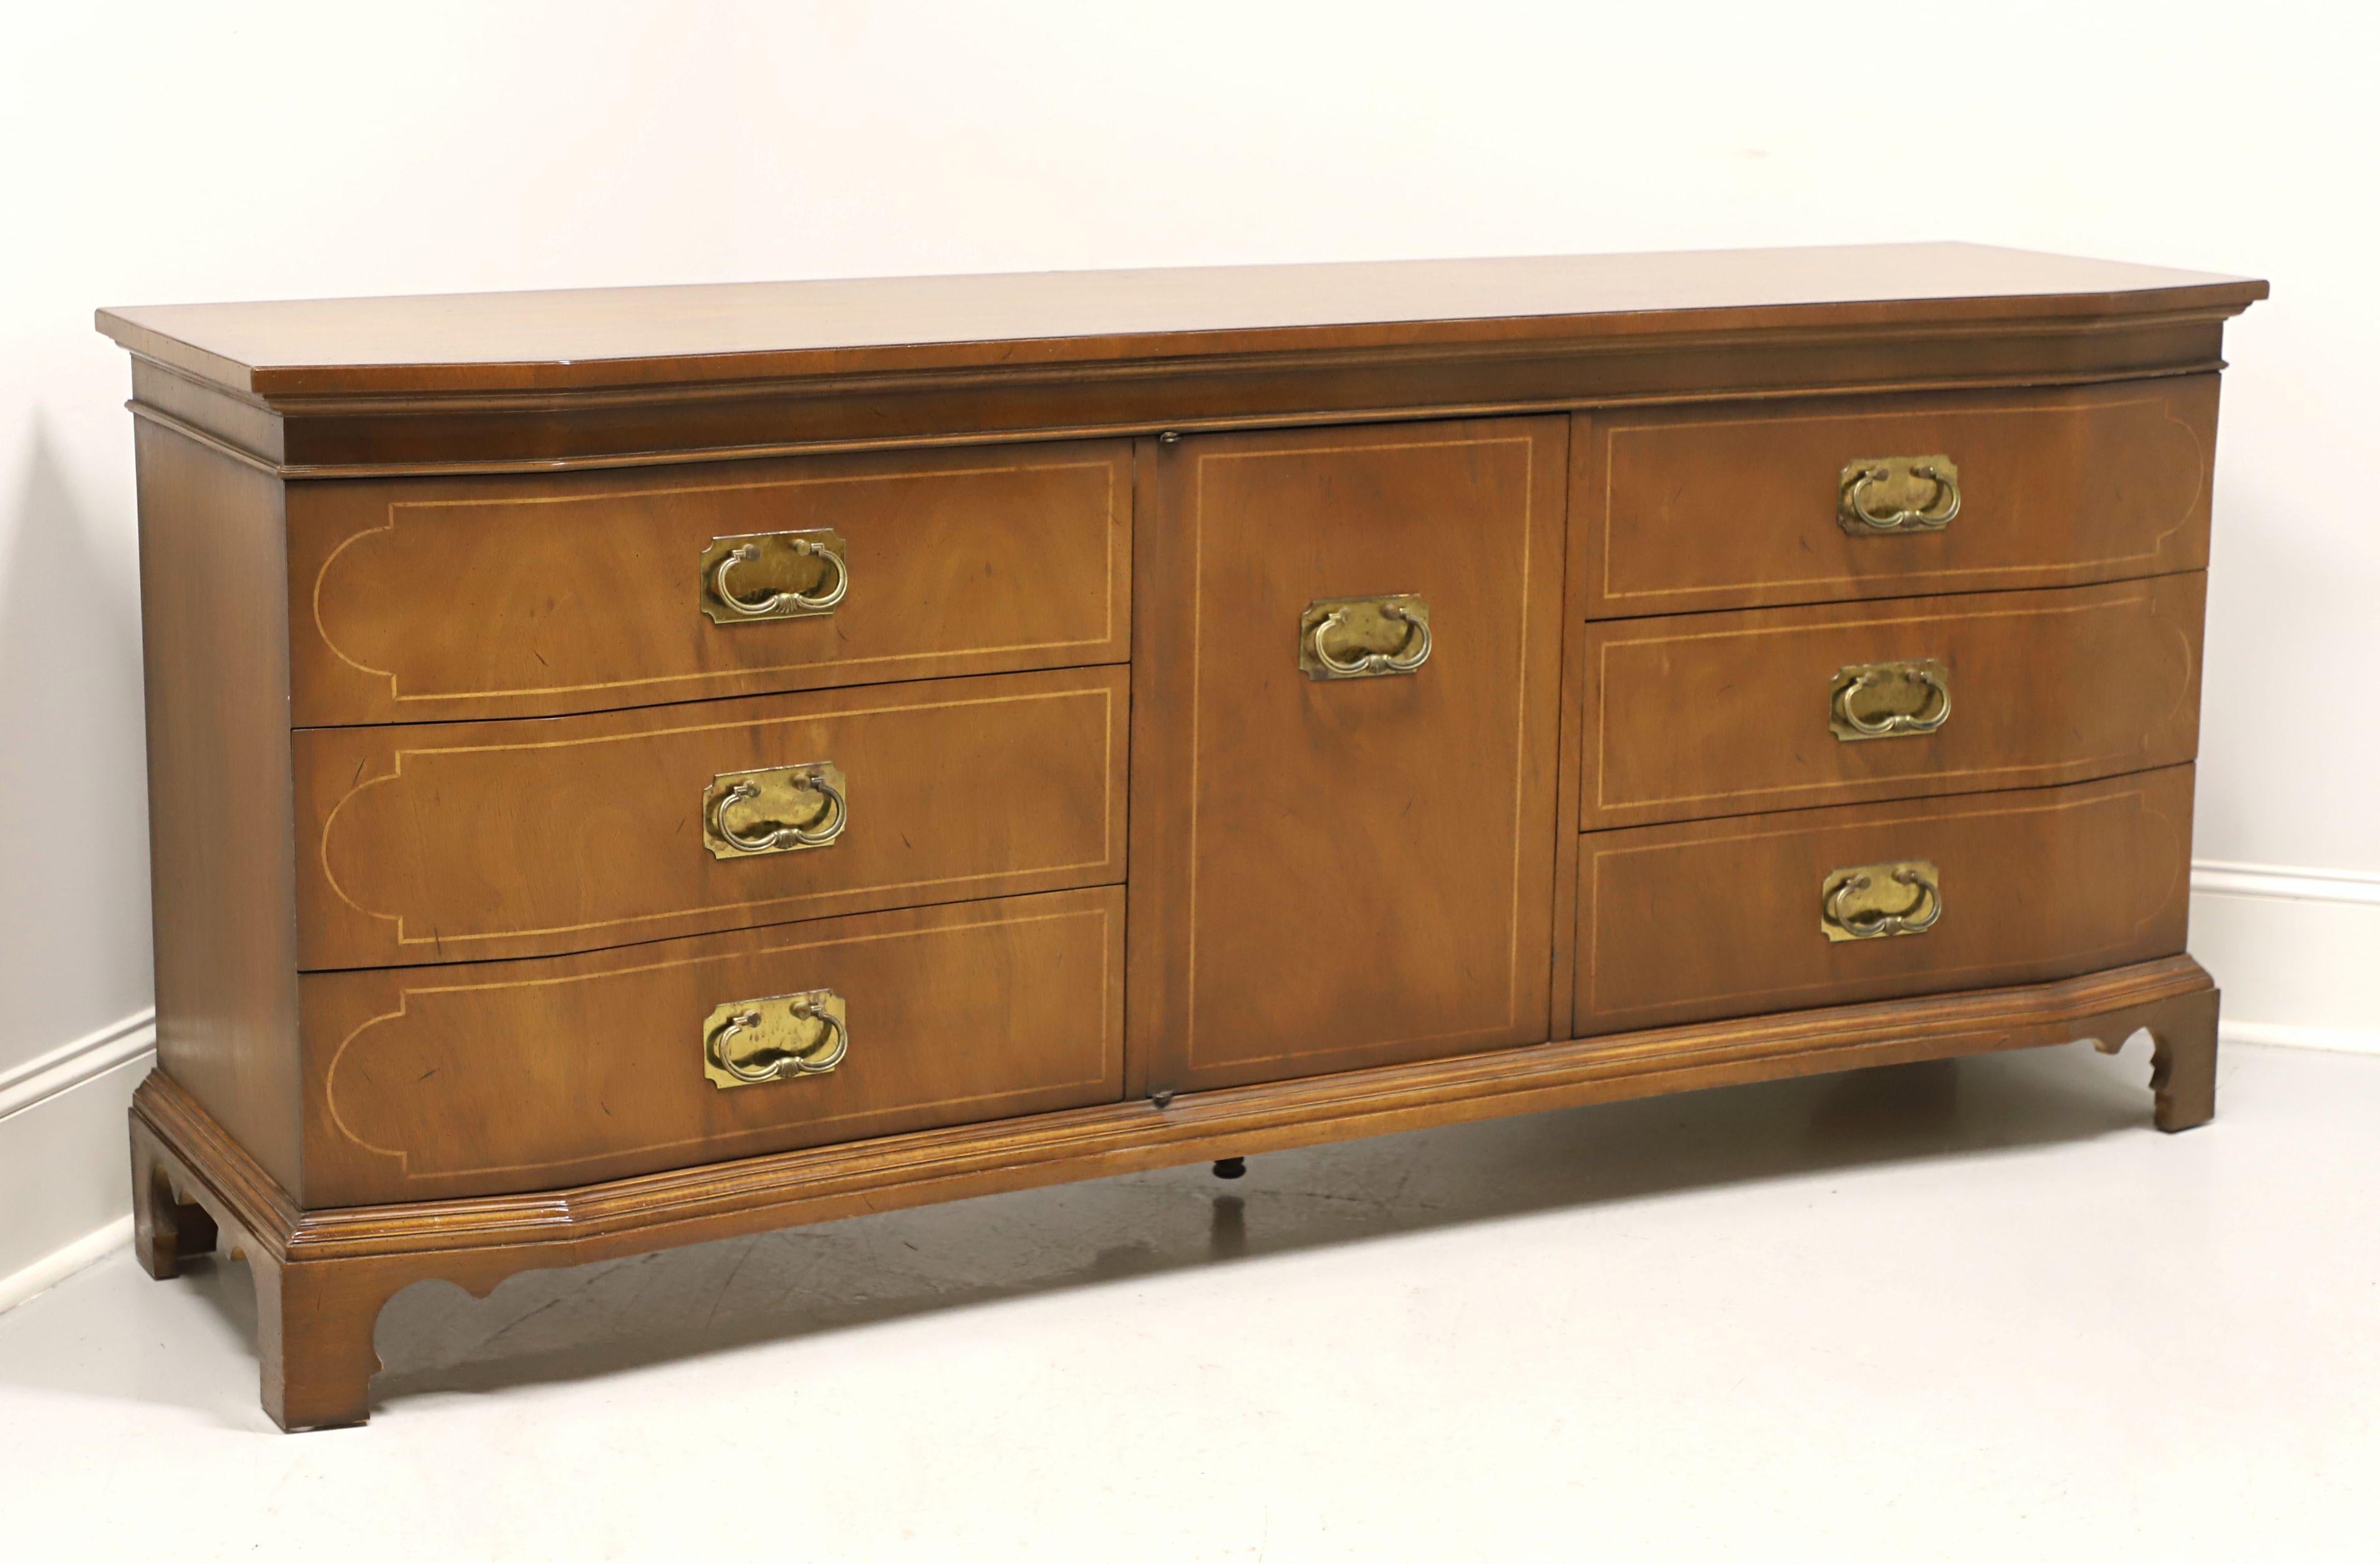 TOMLINSON 1960's Asian Inspired Triple Dresser with String Inlay For Sale 5